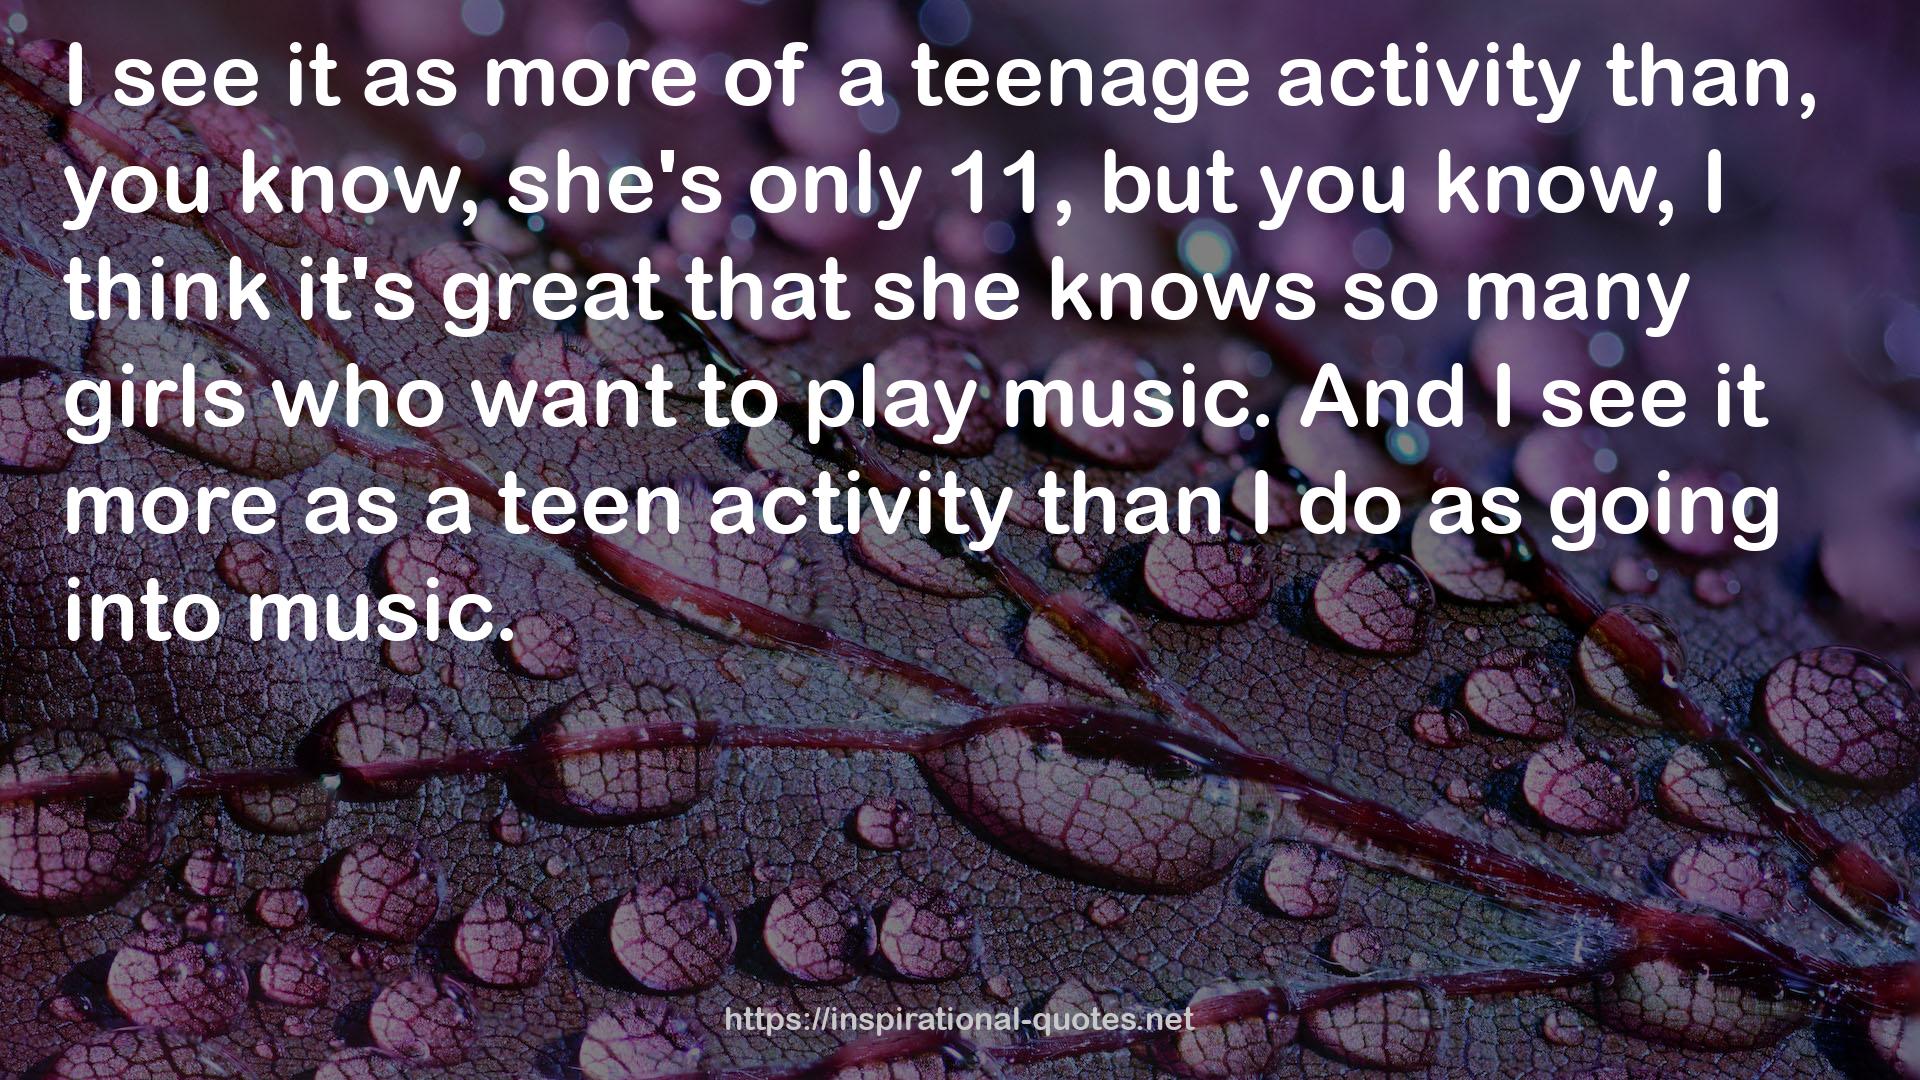 a teenage activity  QUOTES